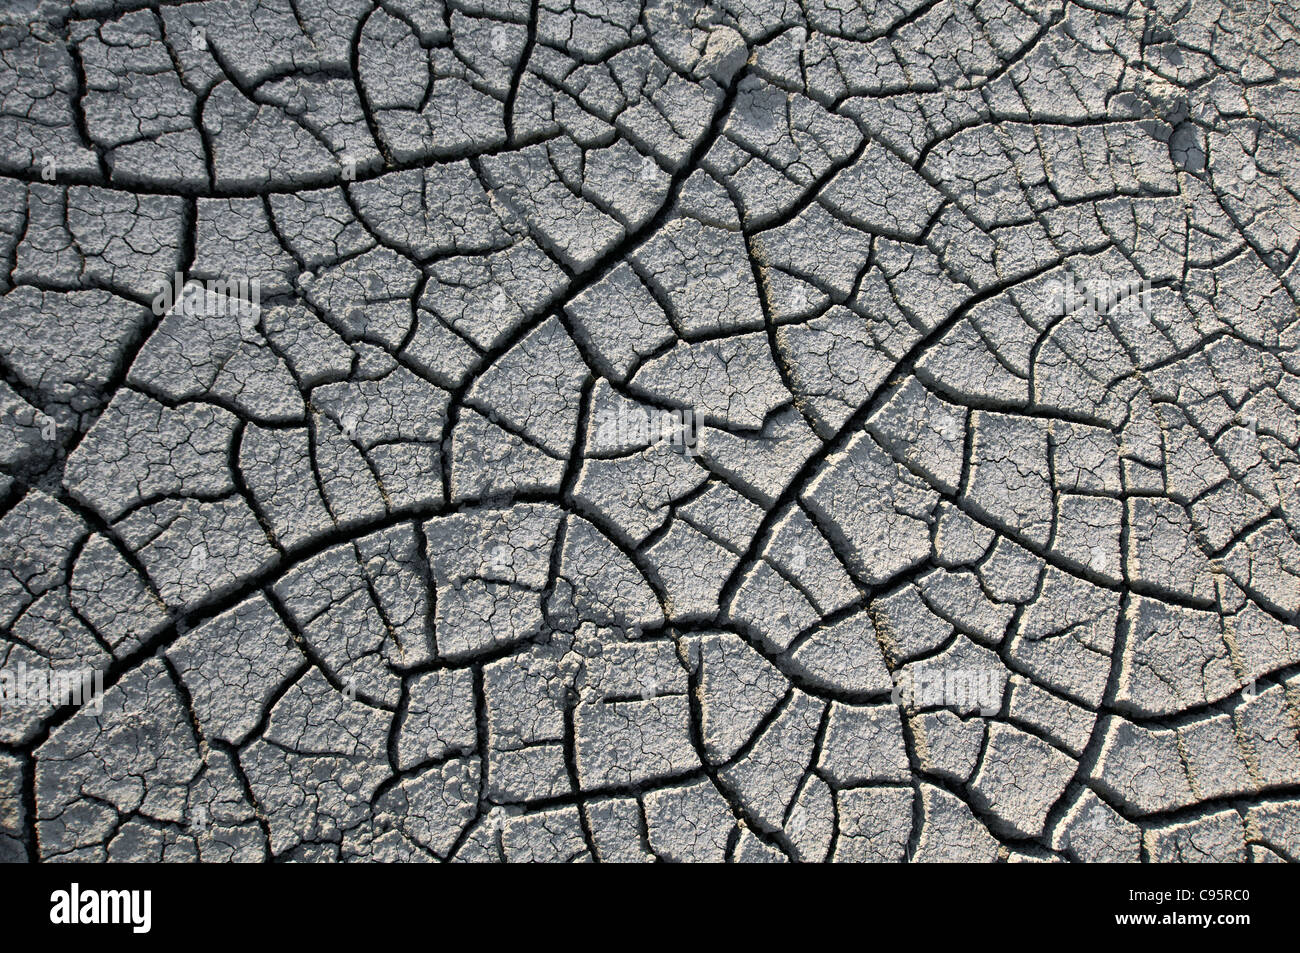 Close up of texture of dry, cracked dry earth. Stock Photo